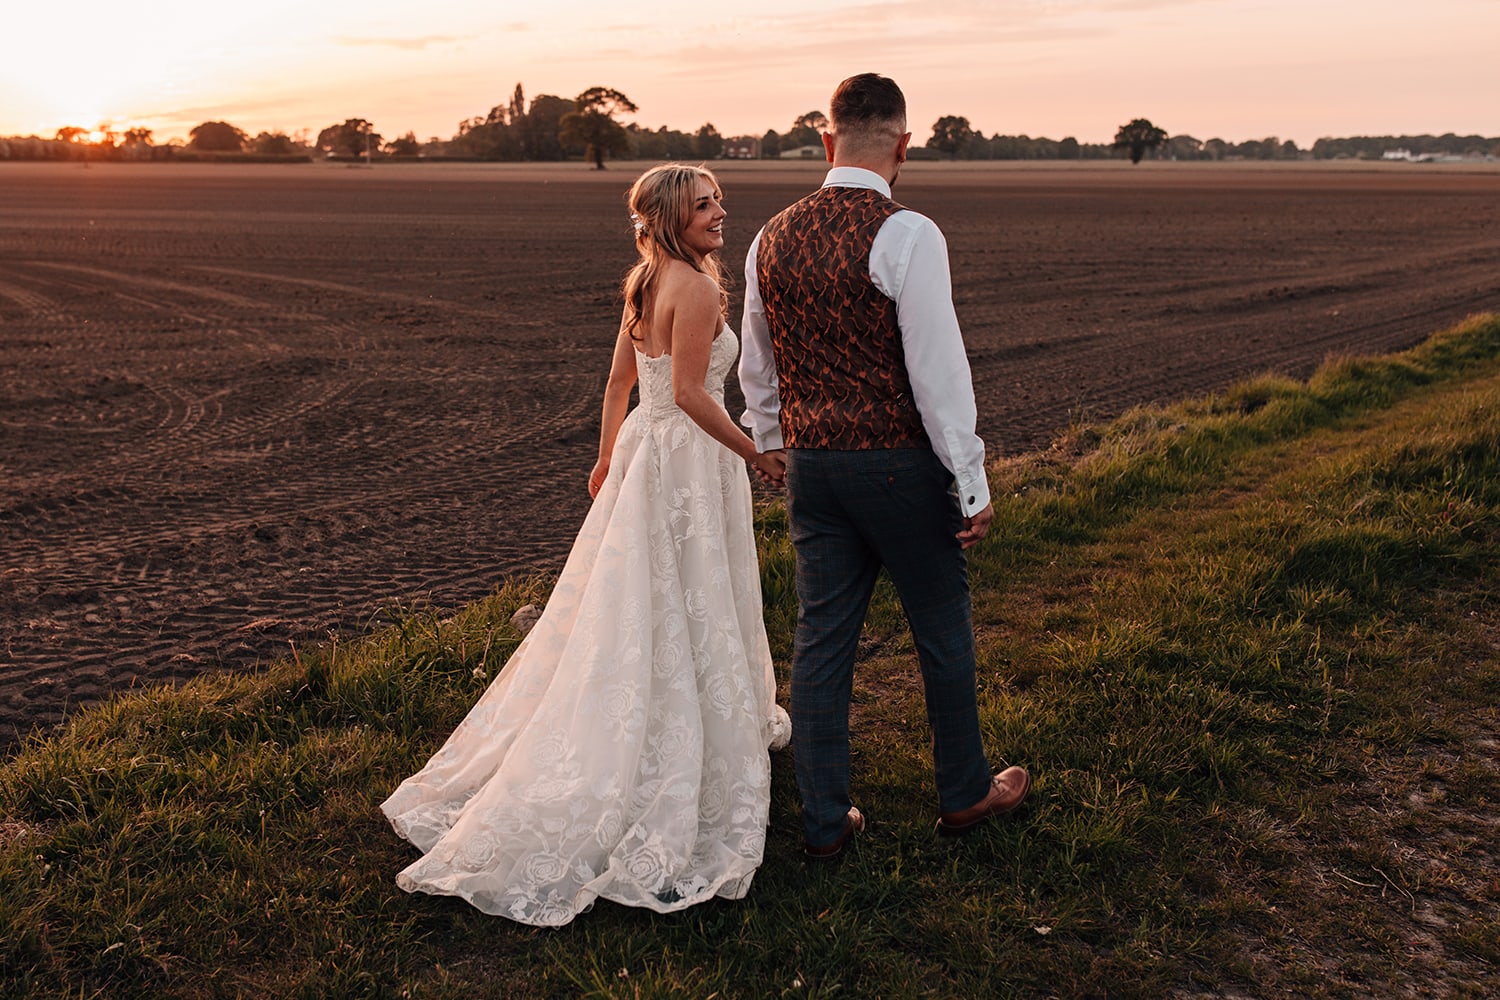 Wedding photograph of a couple walking aways from the camera into the sunset